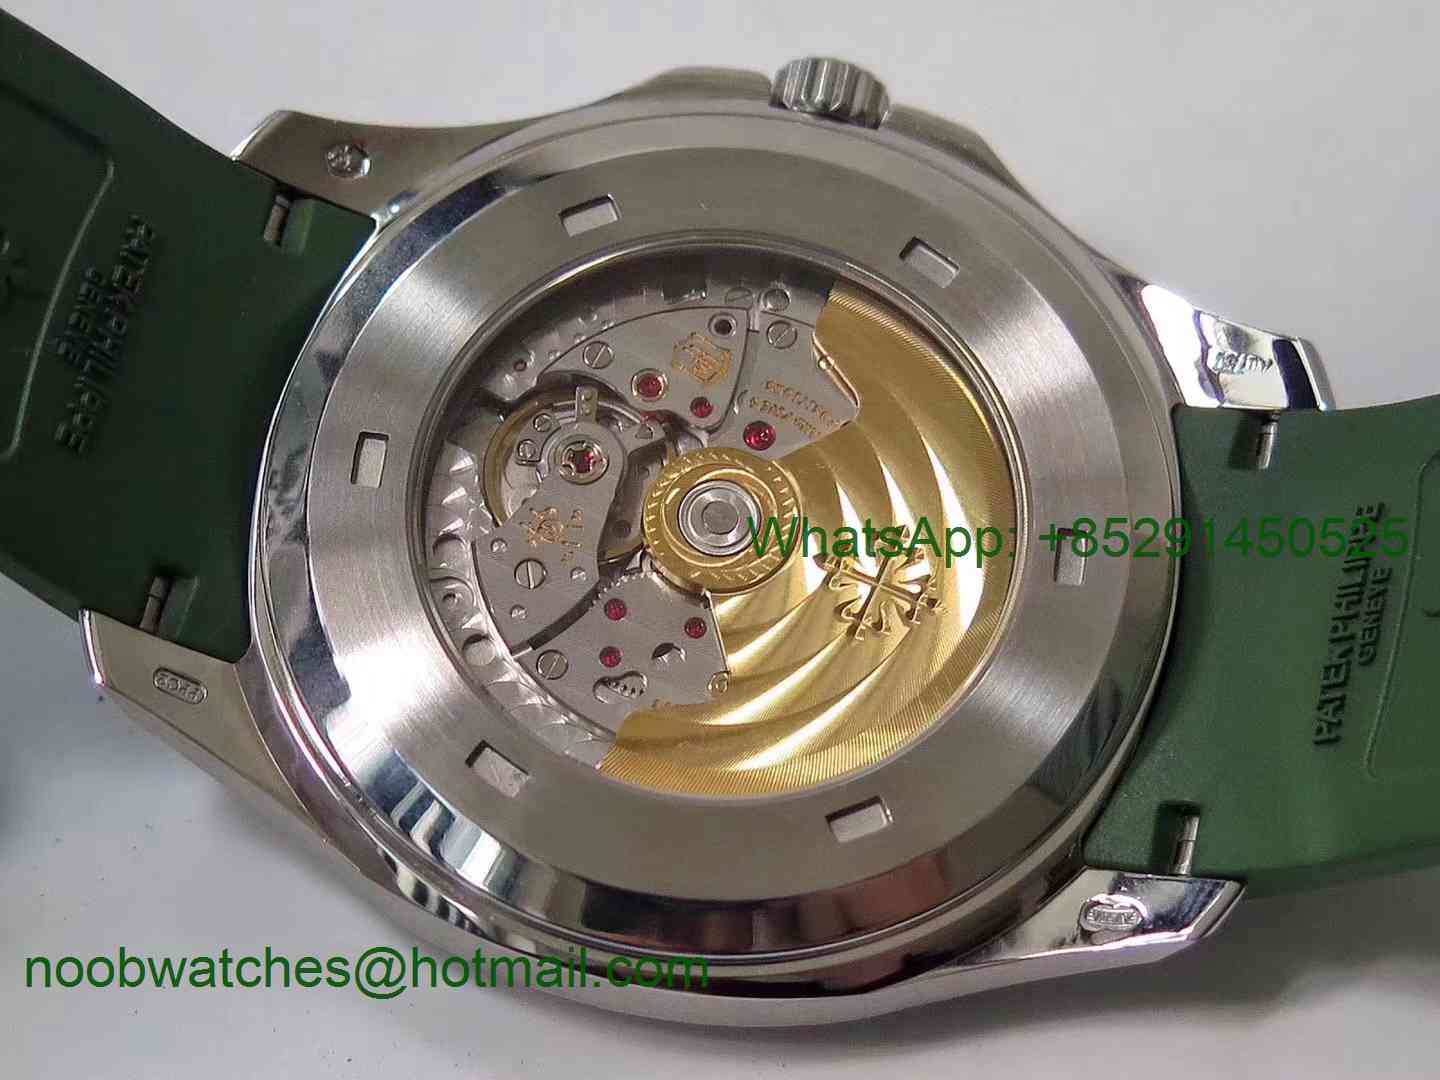 Replica Patek Philippe Aquanaut 5168G 42mm SS ZF 1:1 Best Edition Green Dial on Green Rubber Strap 324CS (Free box)